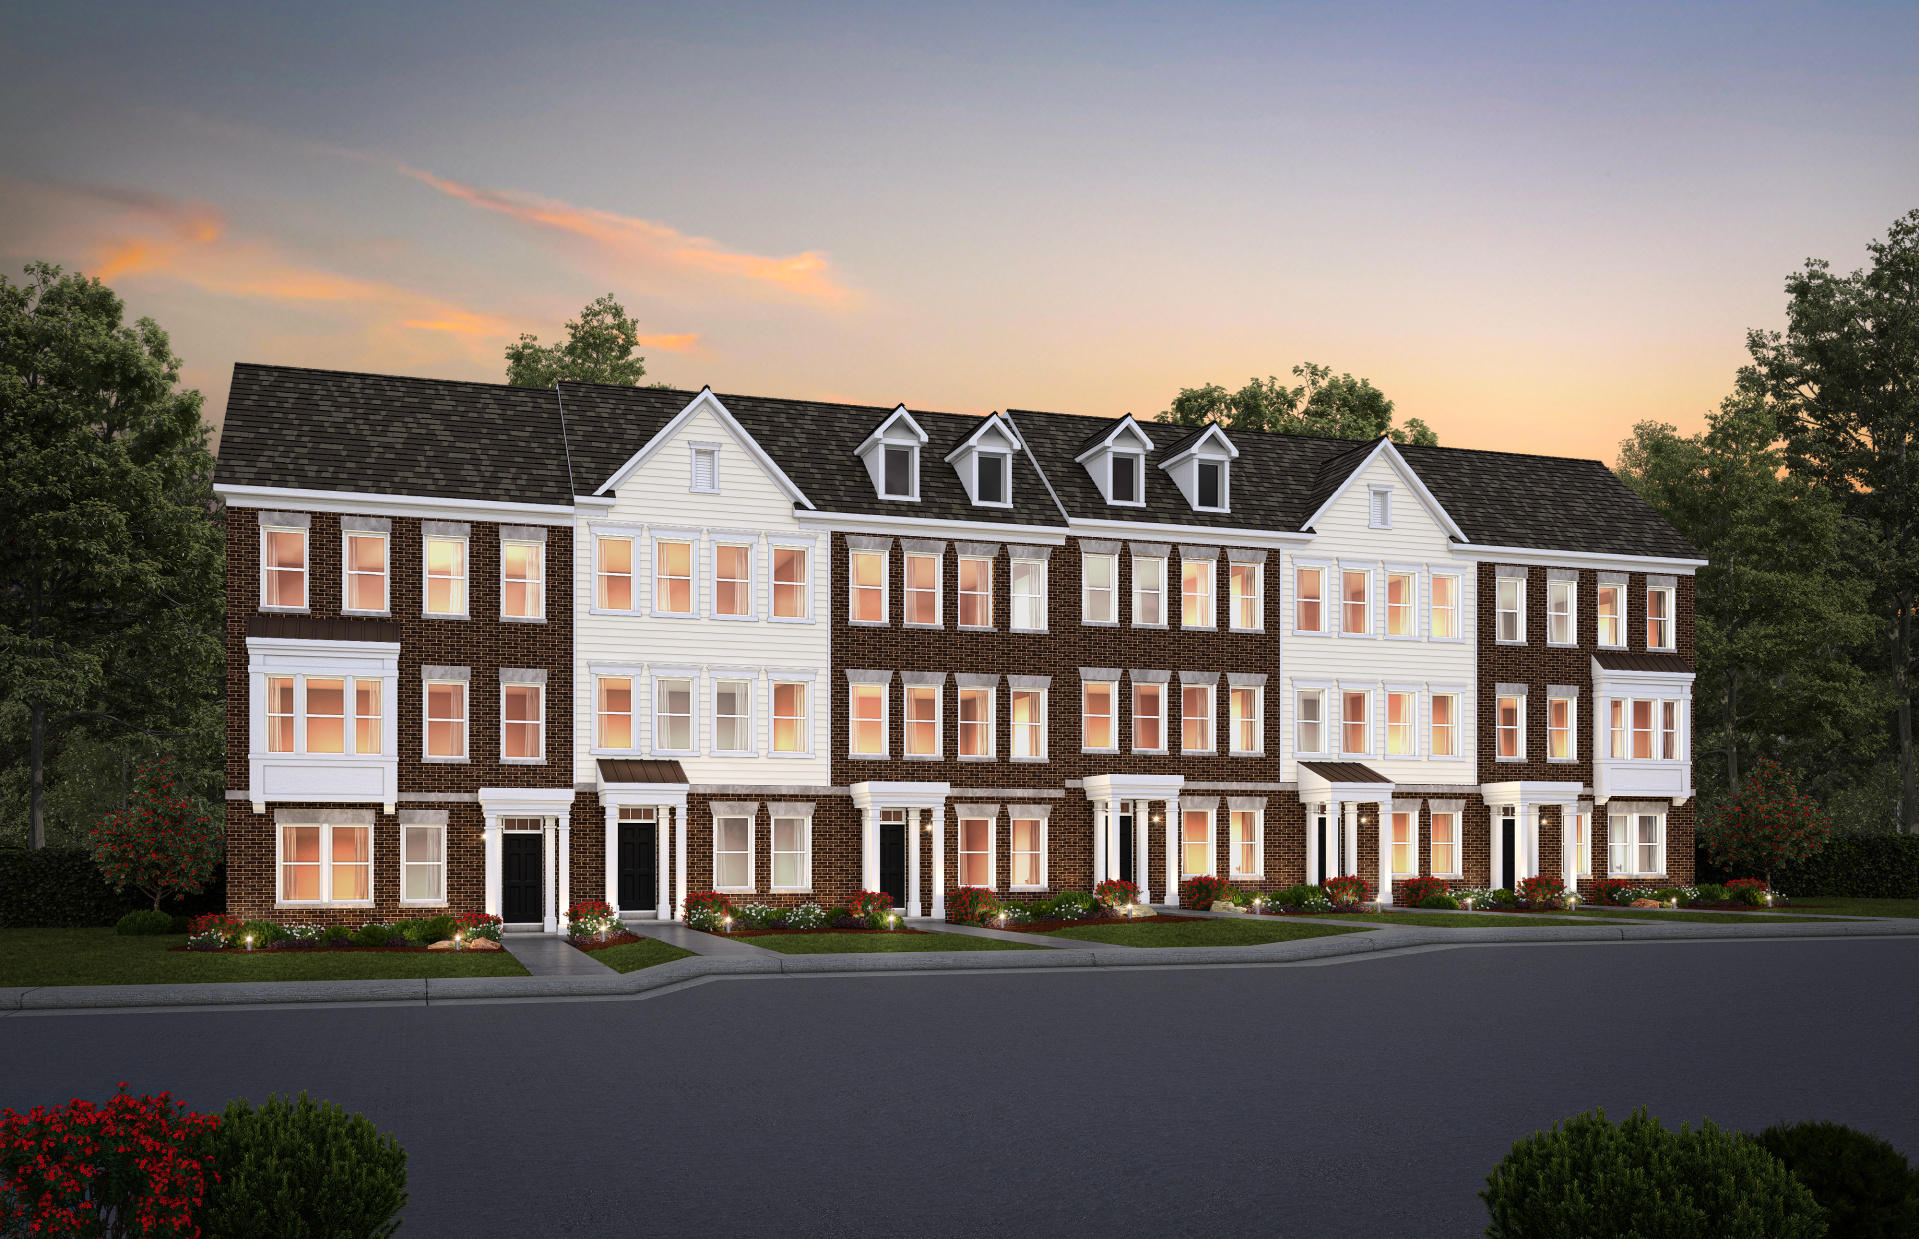 Parkers Creek by Pulte Homes offers New homes in Monmouth County.